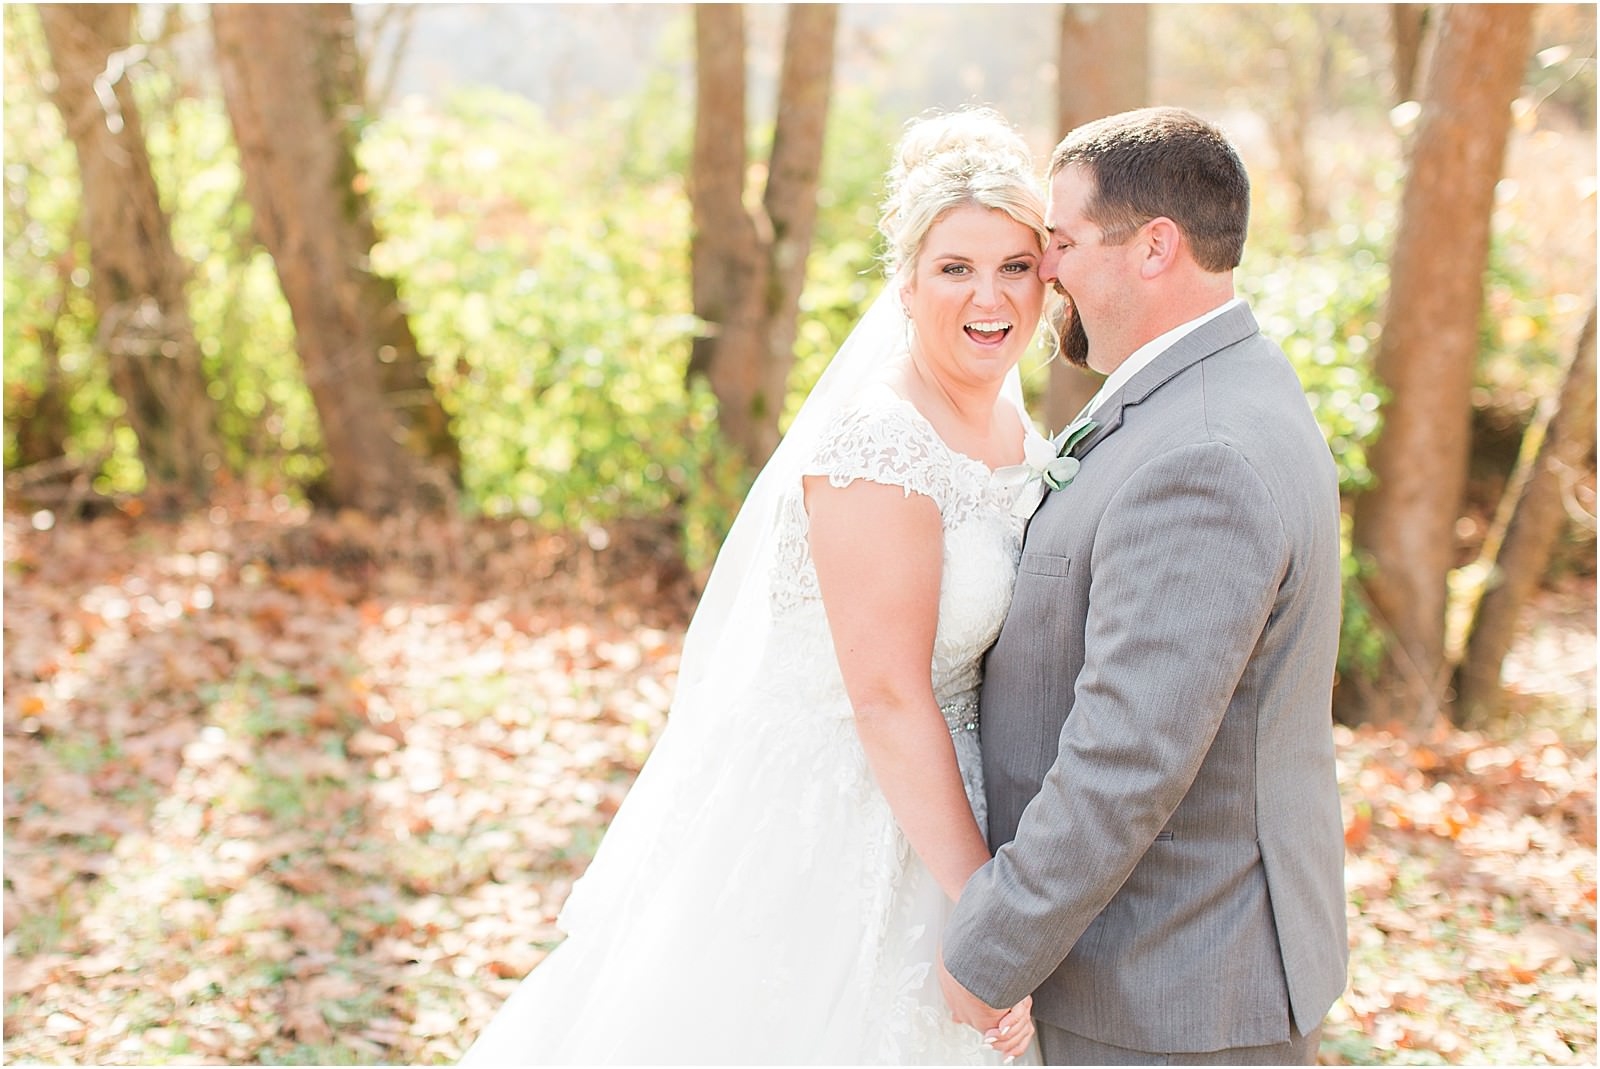 A Navy and Blush Wedding in Tell City Indiana | Brianna and Matt | Bret and Brandie Photography 0092.jpg